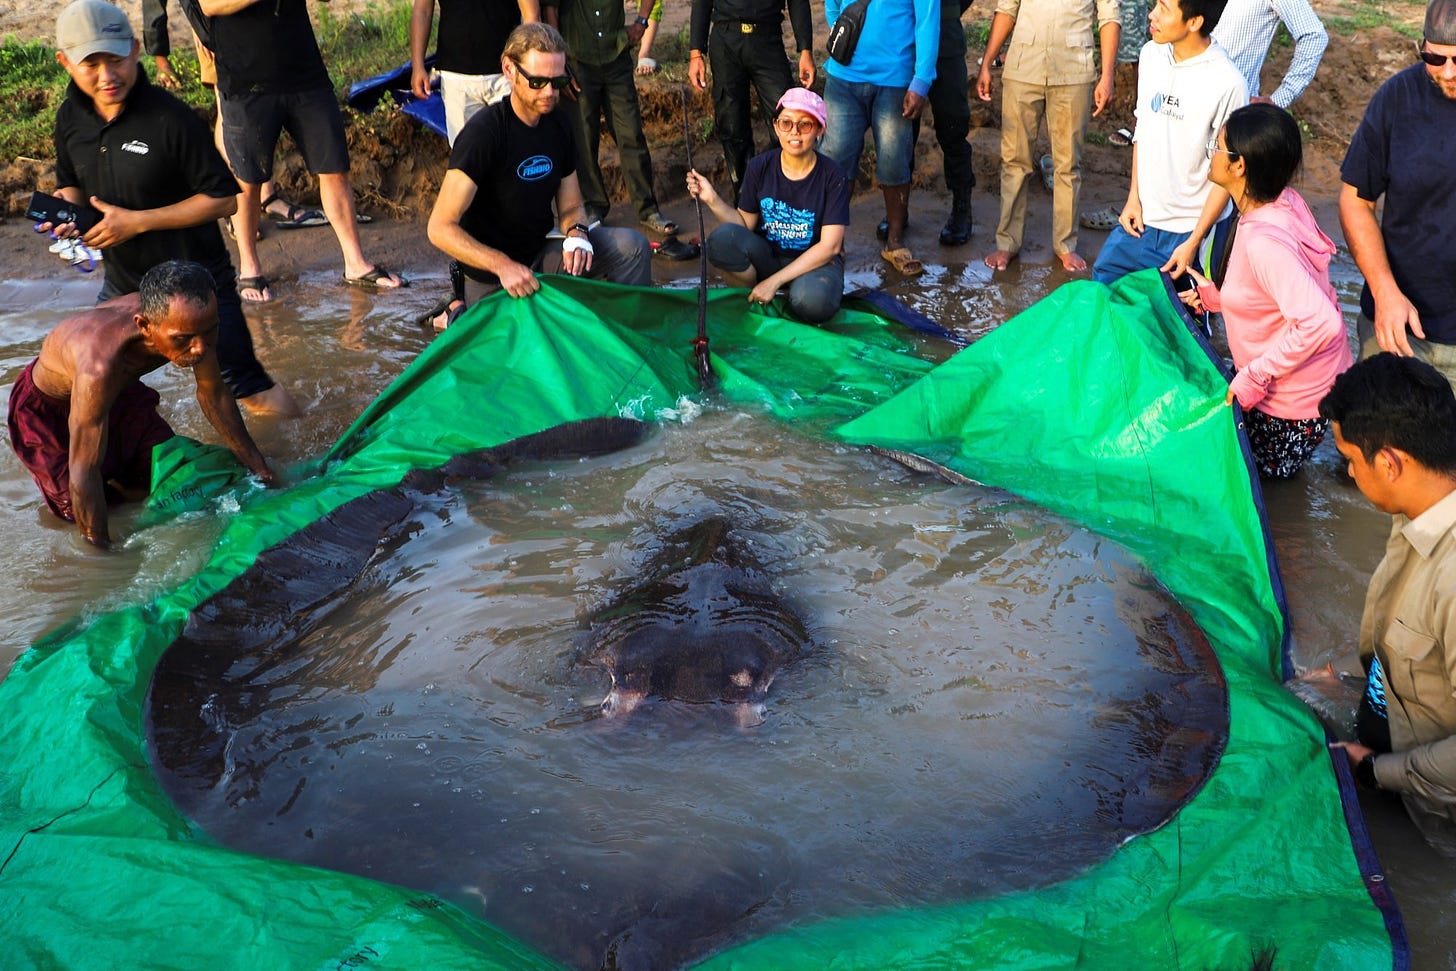 The world’s biggest freshwater fish, a giant stingray, is pictured with International scientists, Cambodian fisheries officials and villagers at Koh Preah island in the Mekong River. Photo: Reuters